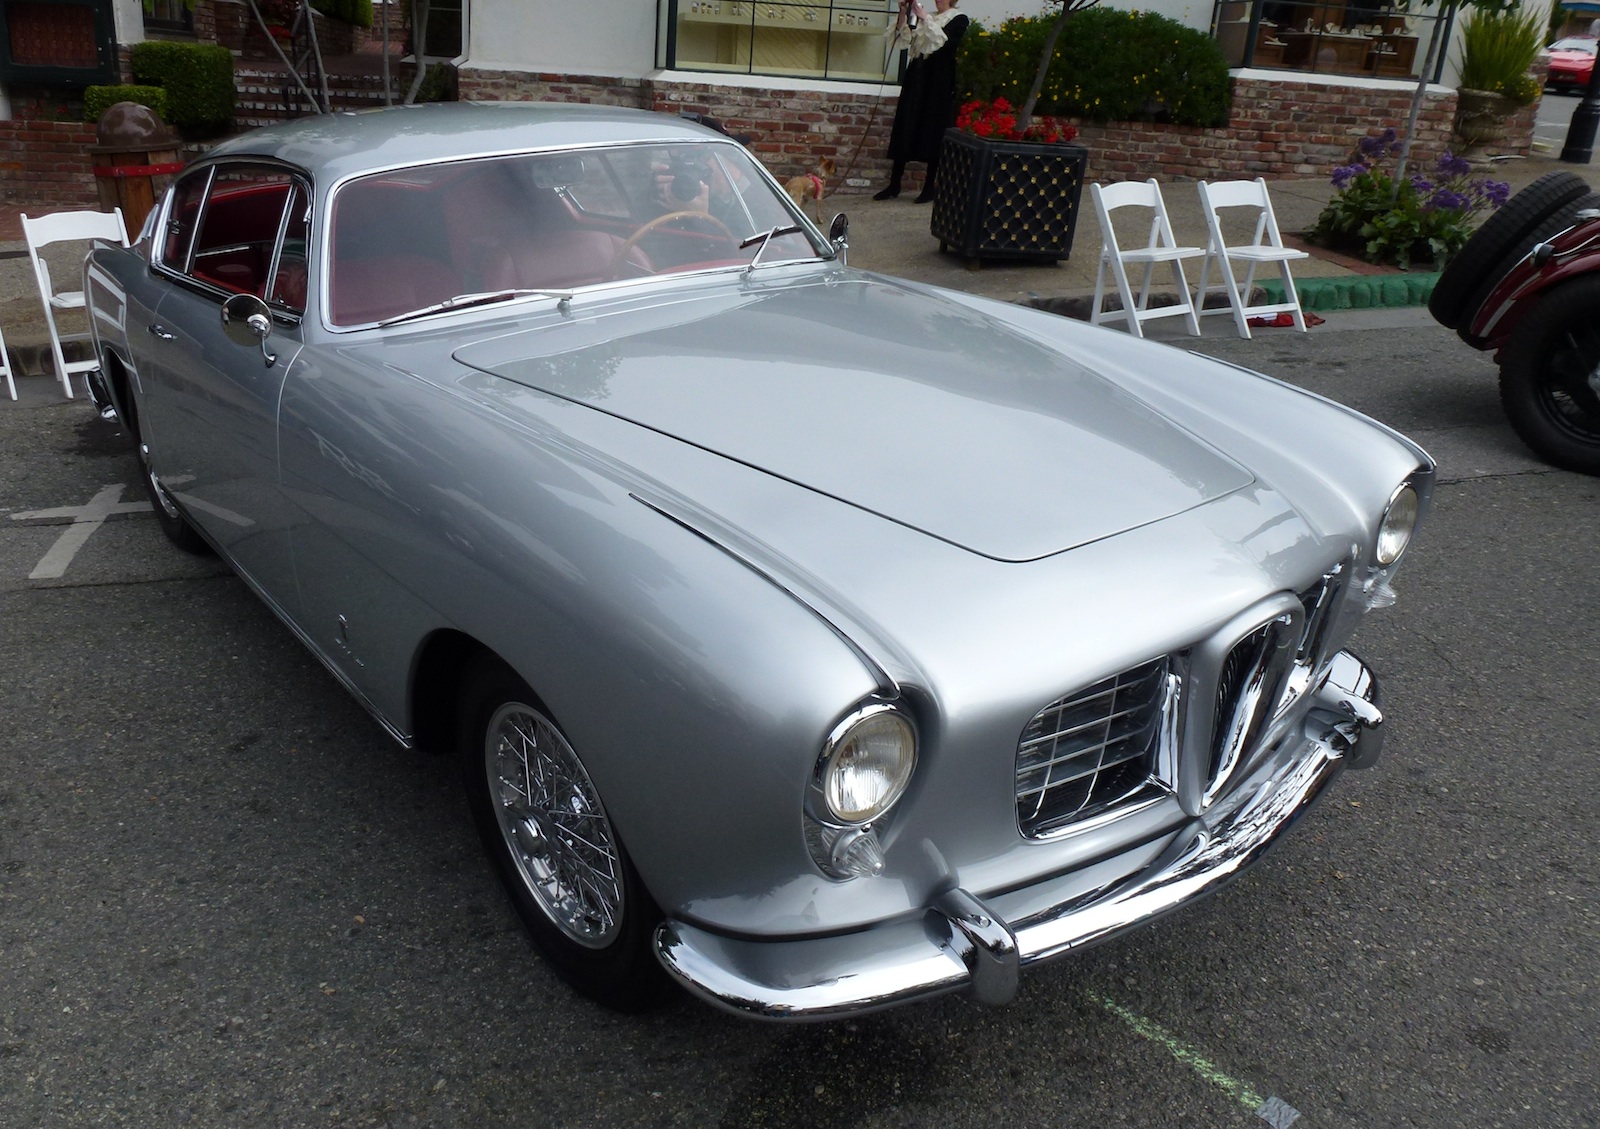 What A Beauty - The 1954 Alfa Romeo 1900 CSS By Ghia